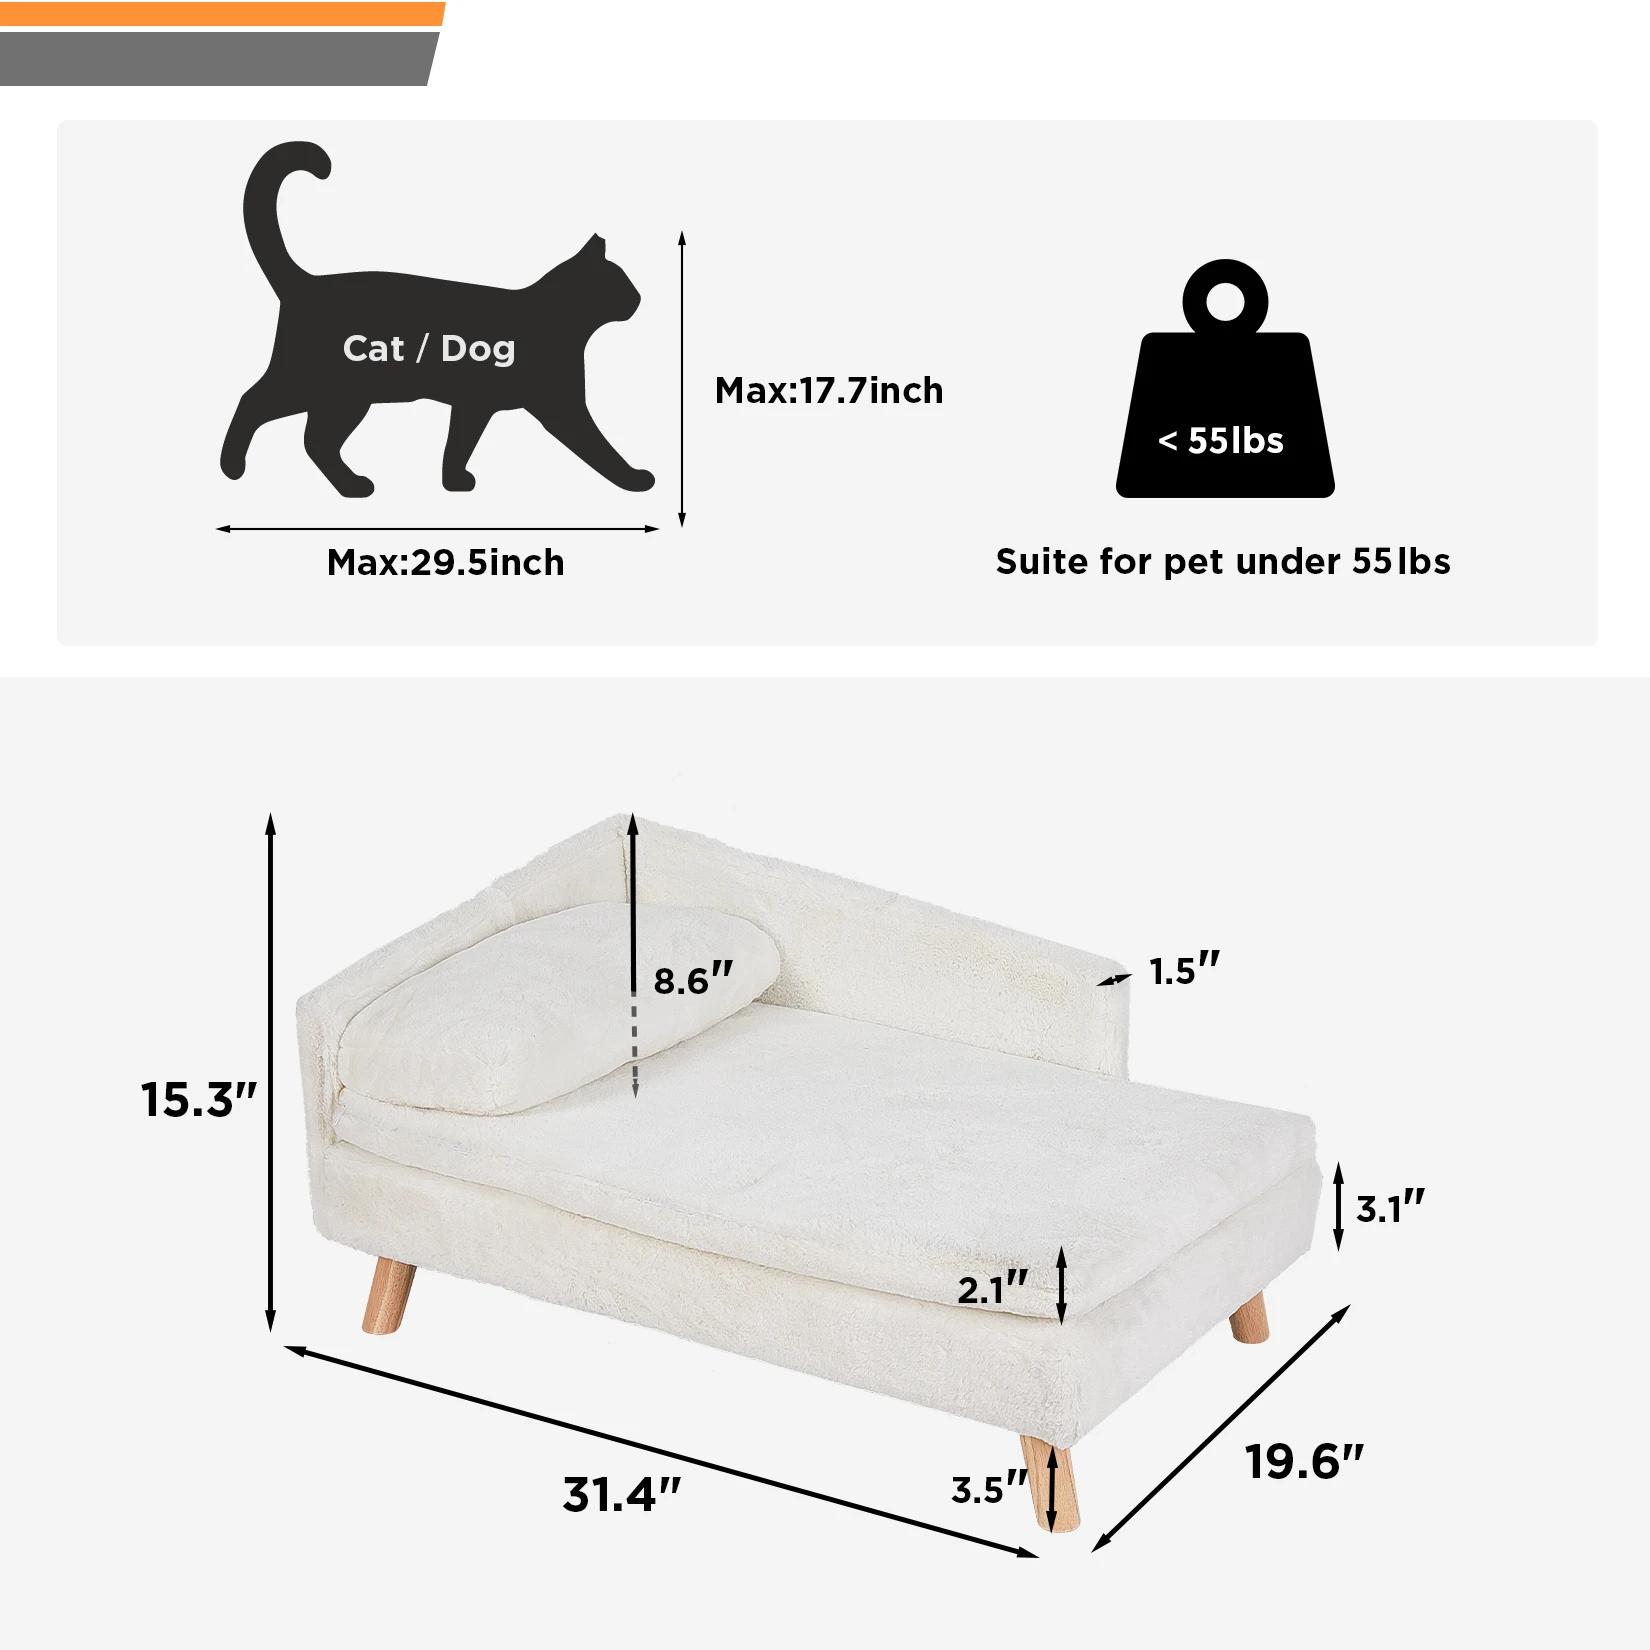 Nordic Elevated Pet Sofa Bed with Cozy Pad and Sturdy Wood Legs - Waterproof for Small Dogs and Kittens